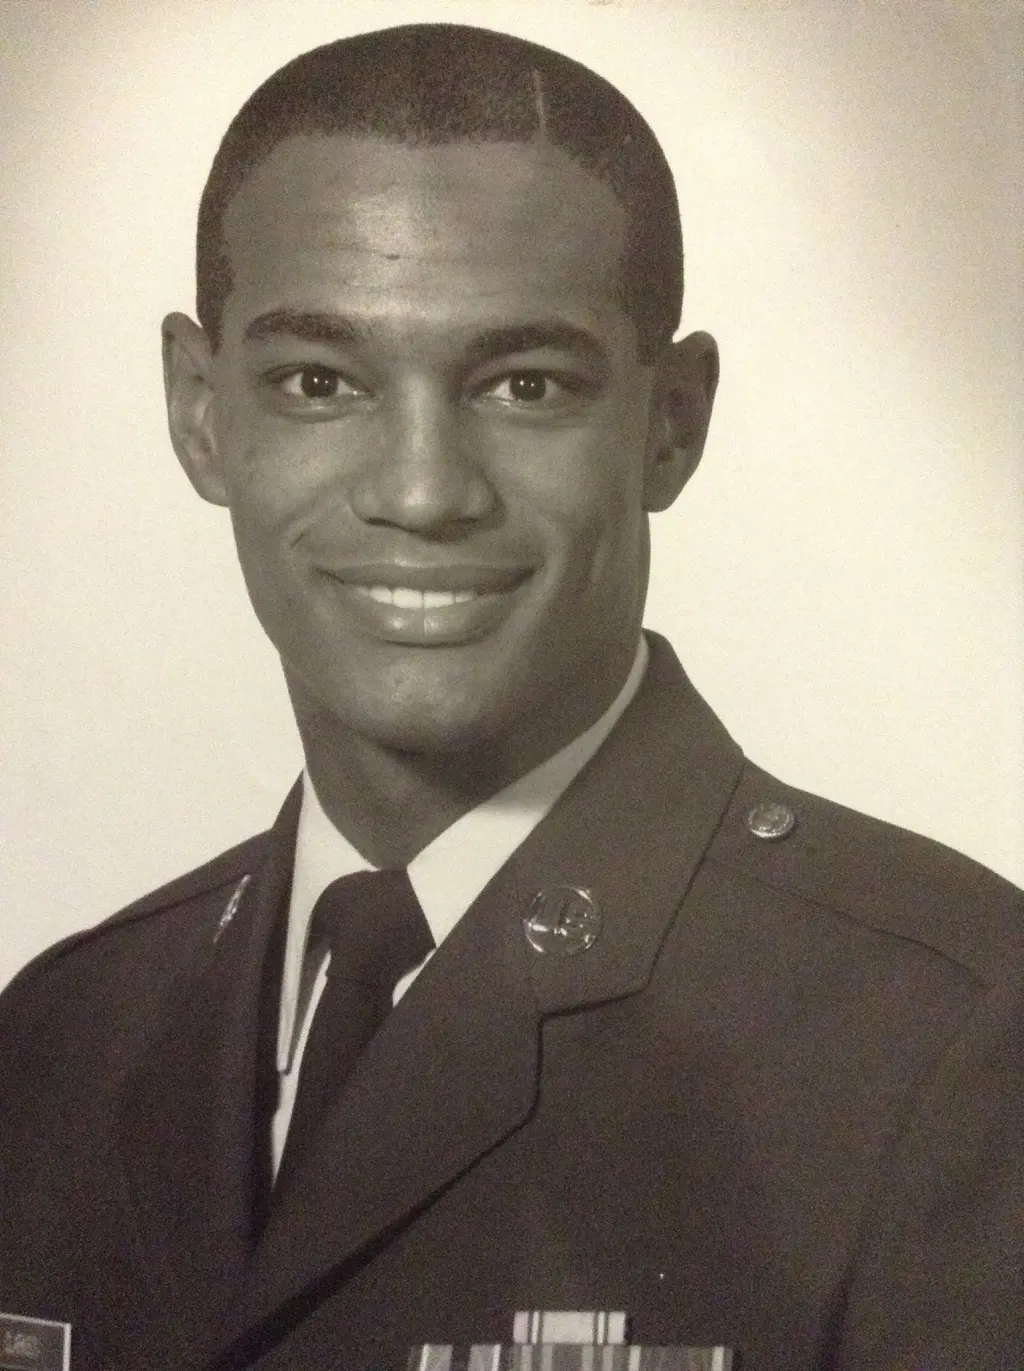 An old picture of Coach Mike during his days as an Air Force officer.